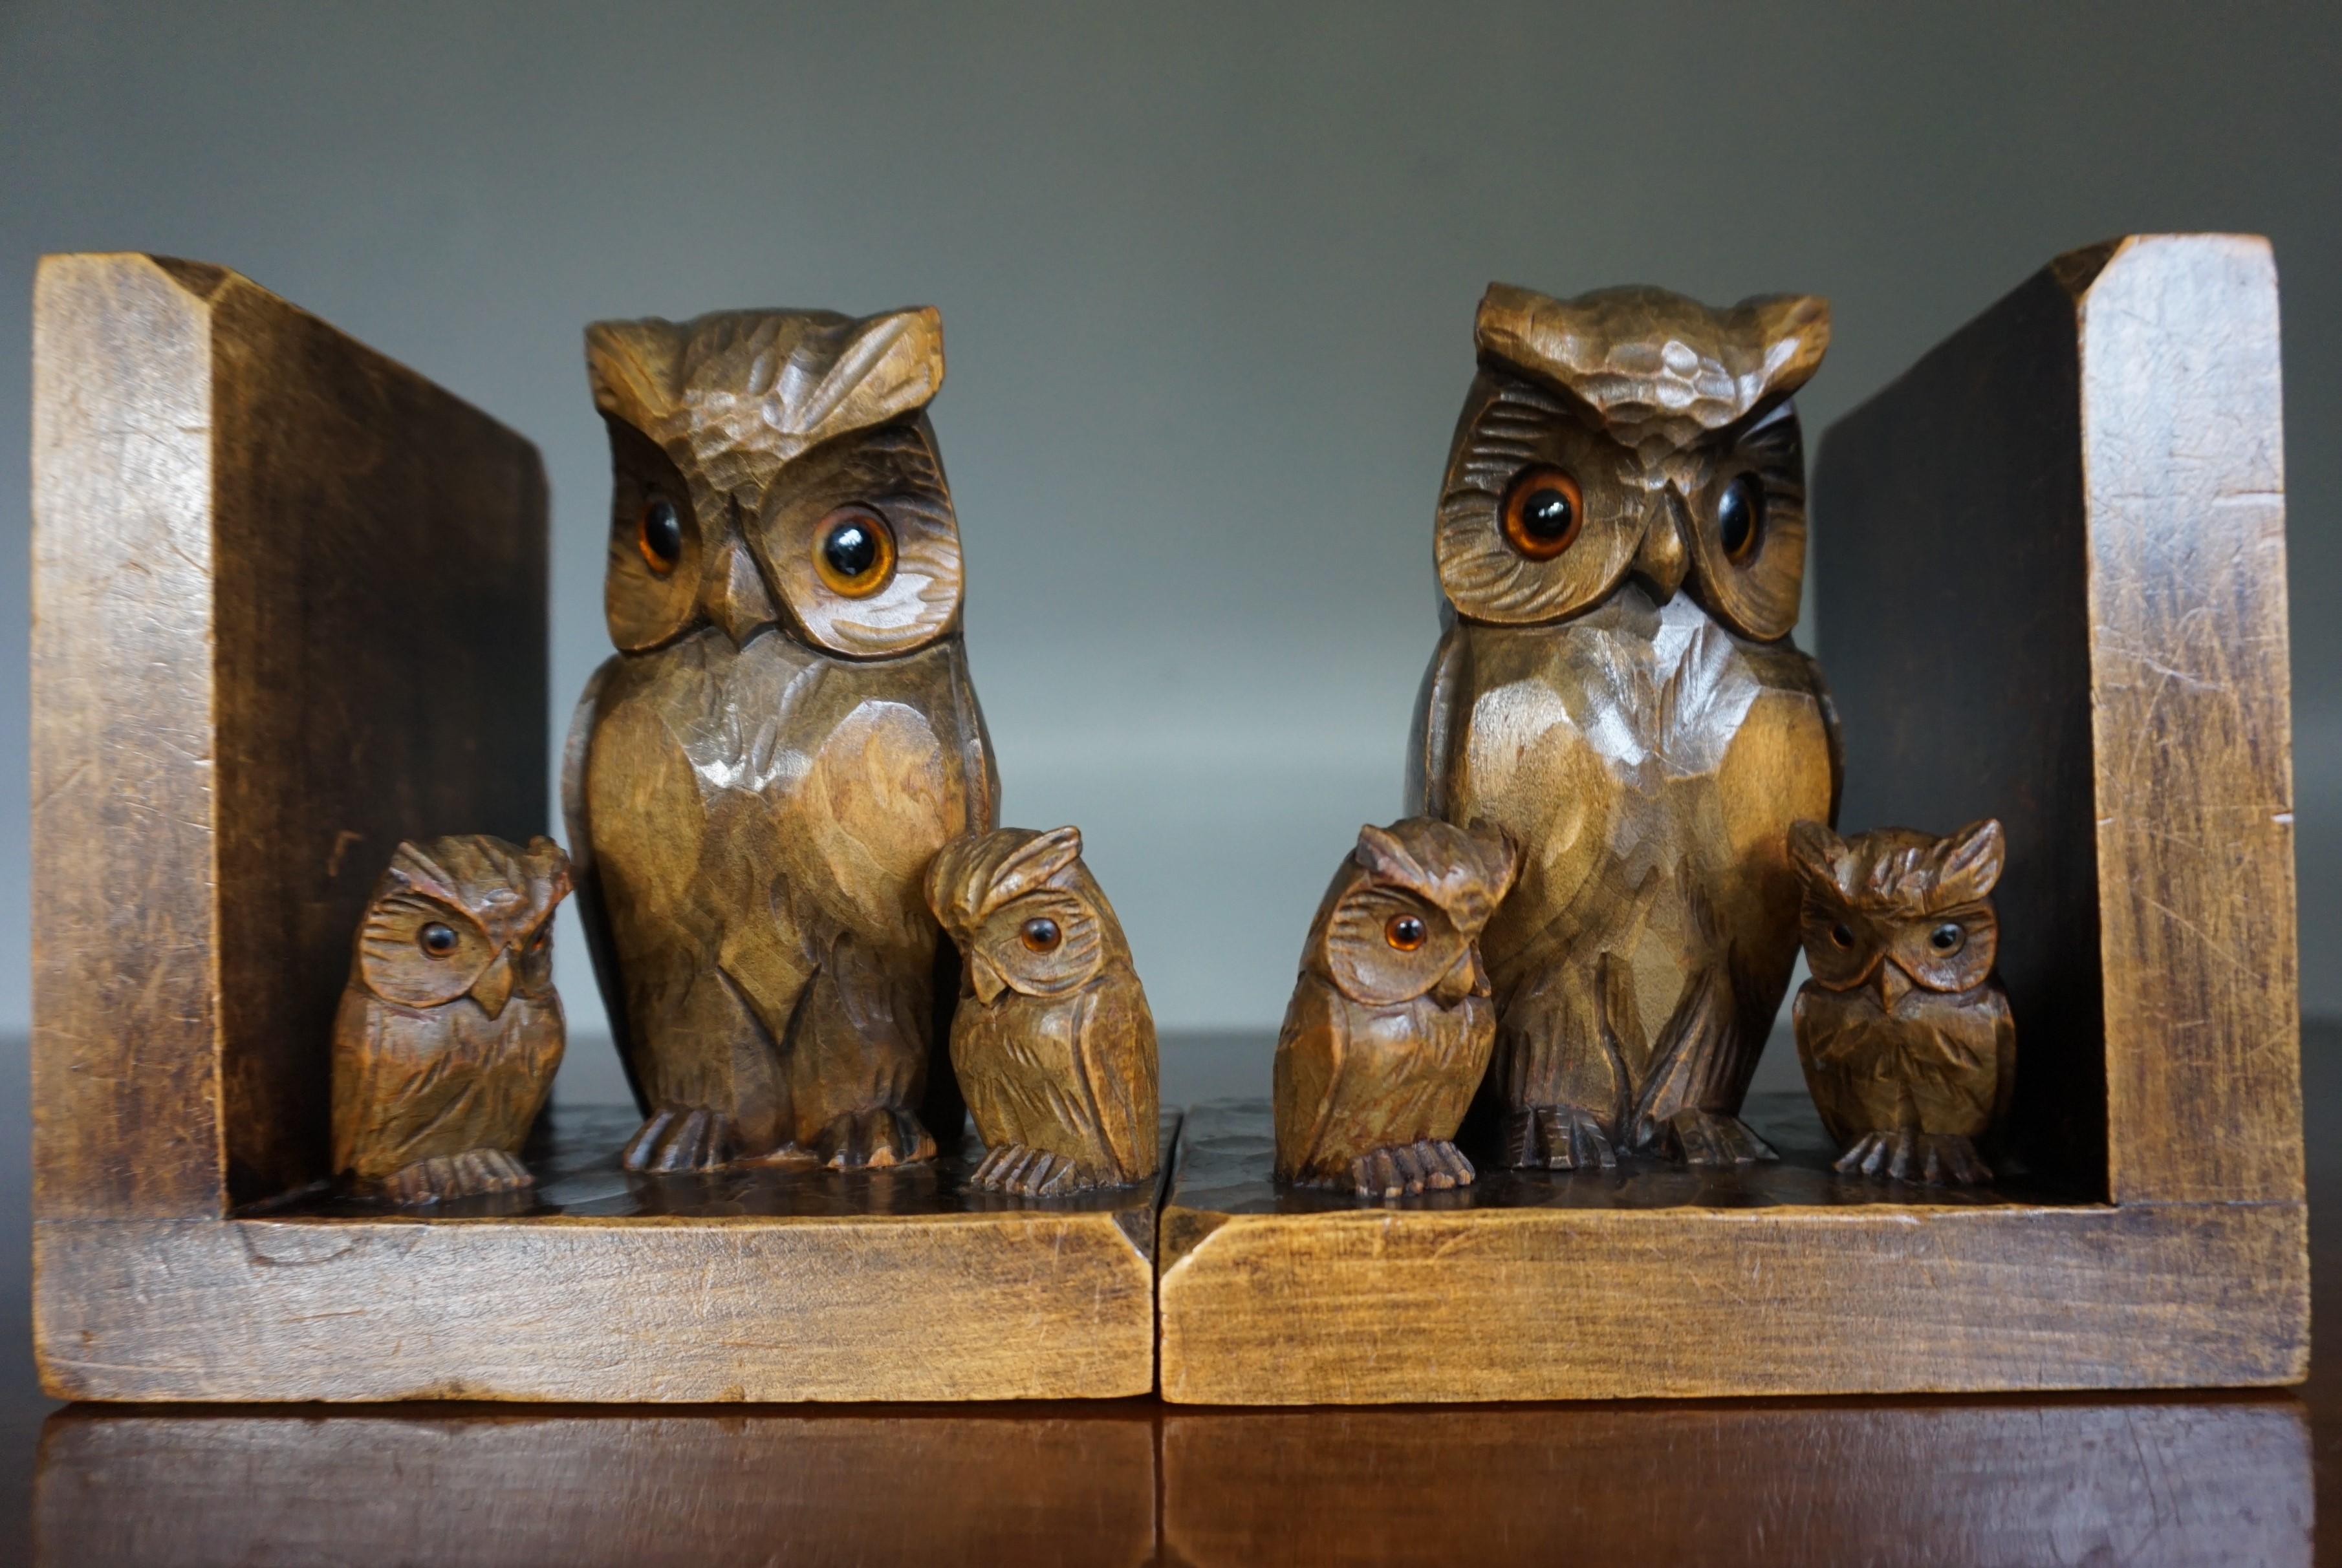 Early 20th Century Art Deco Era Bookends W. Hand Carved Family of Owl Sculptures 5